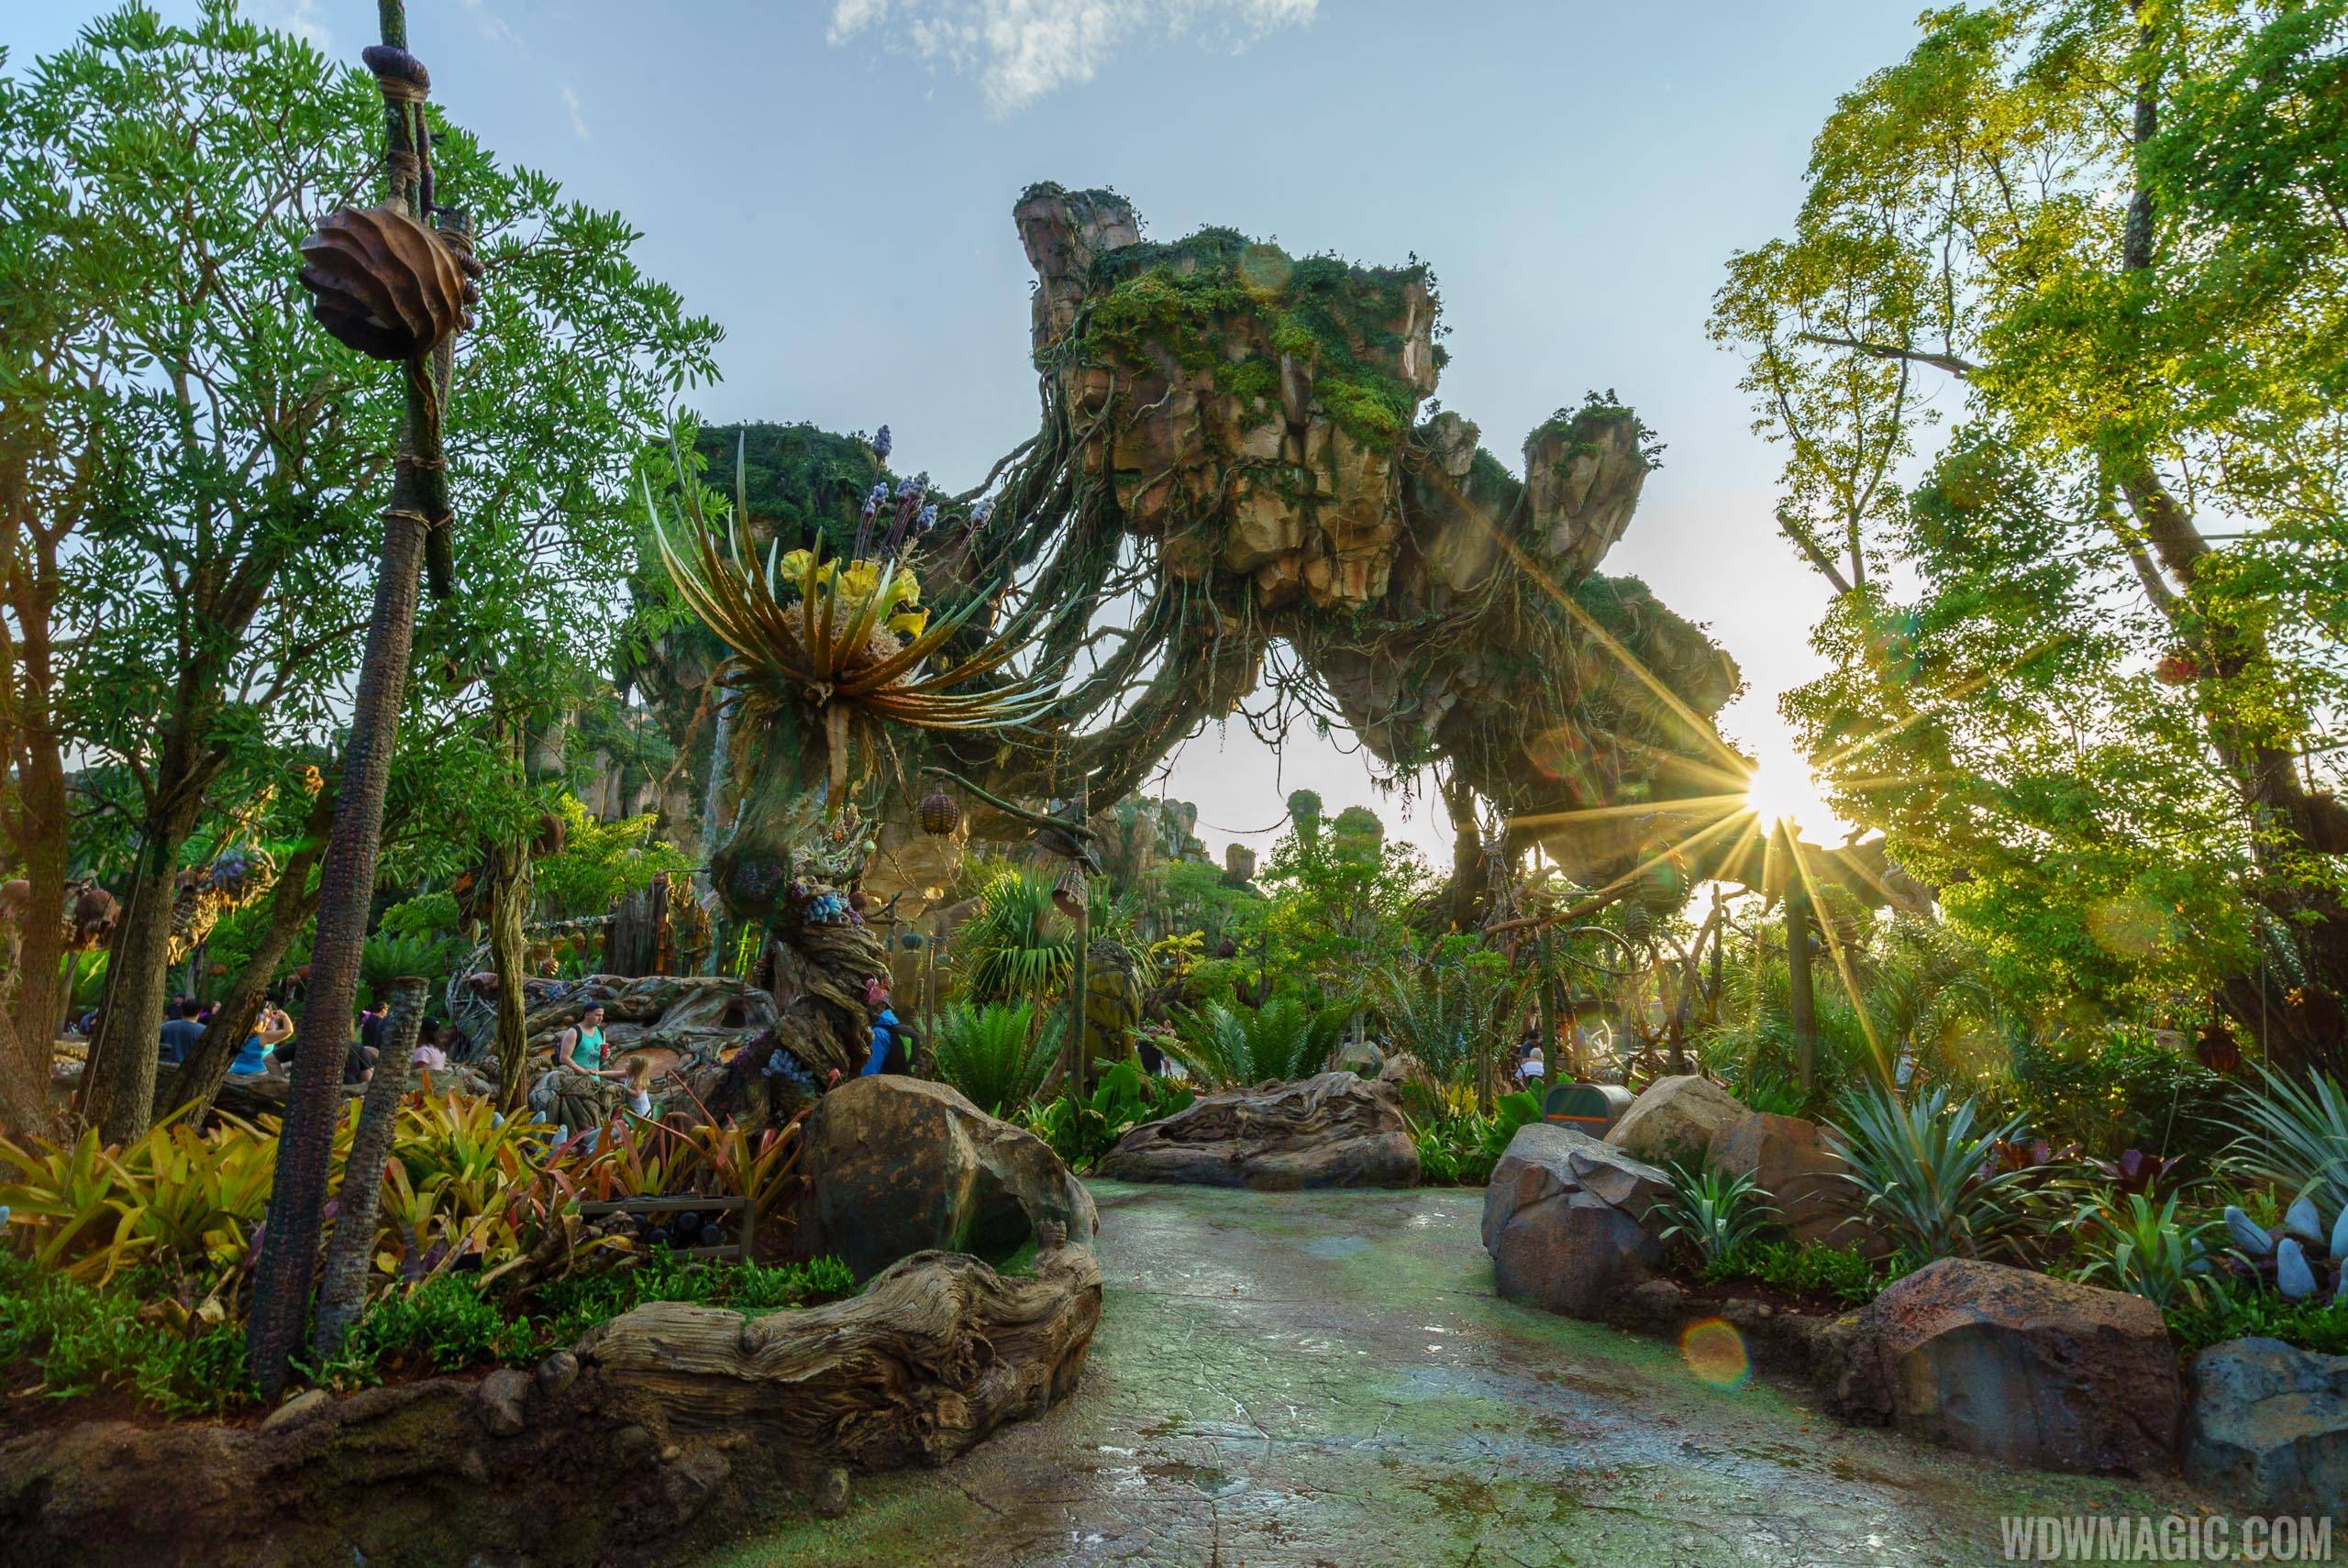 Both of Pandora's attractions are posting significant standby wait times this week